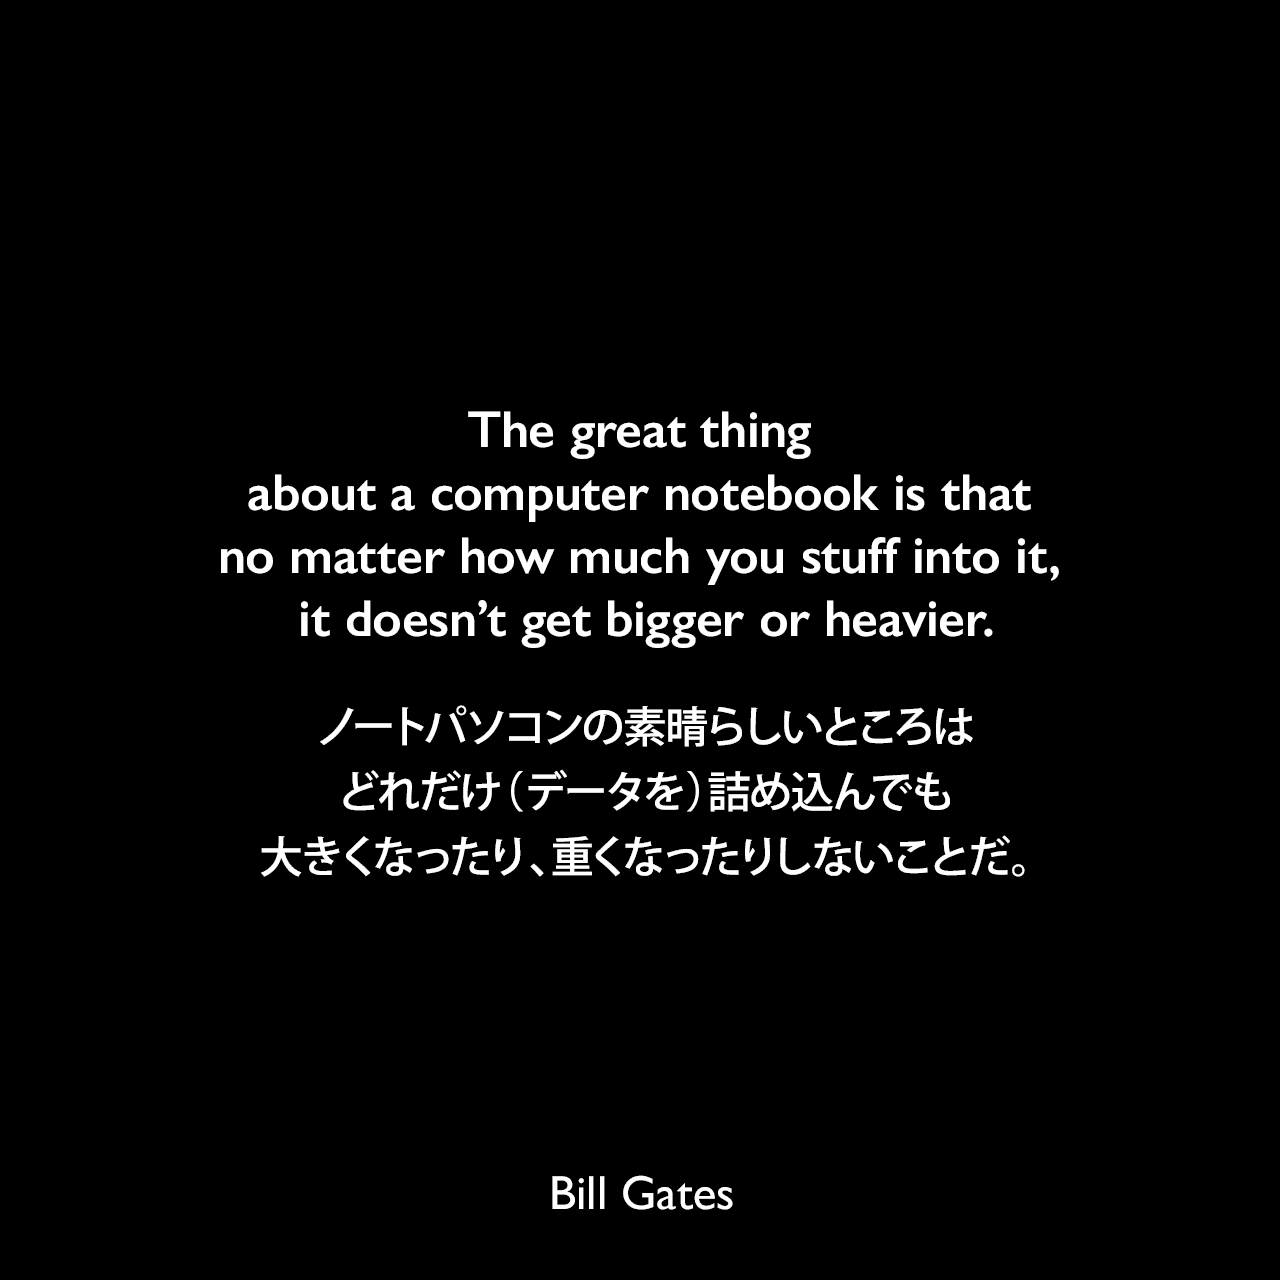 The great thing about a computer notebook is that no matter how much you stuff into it, it doesn’t get bigger or heavier.ノートパソコンの素晴らしいところは、どれだけ（データを）詰め込んでも、大きくなったり、重くなったりしないことだ。Bill Gates